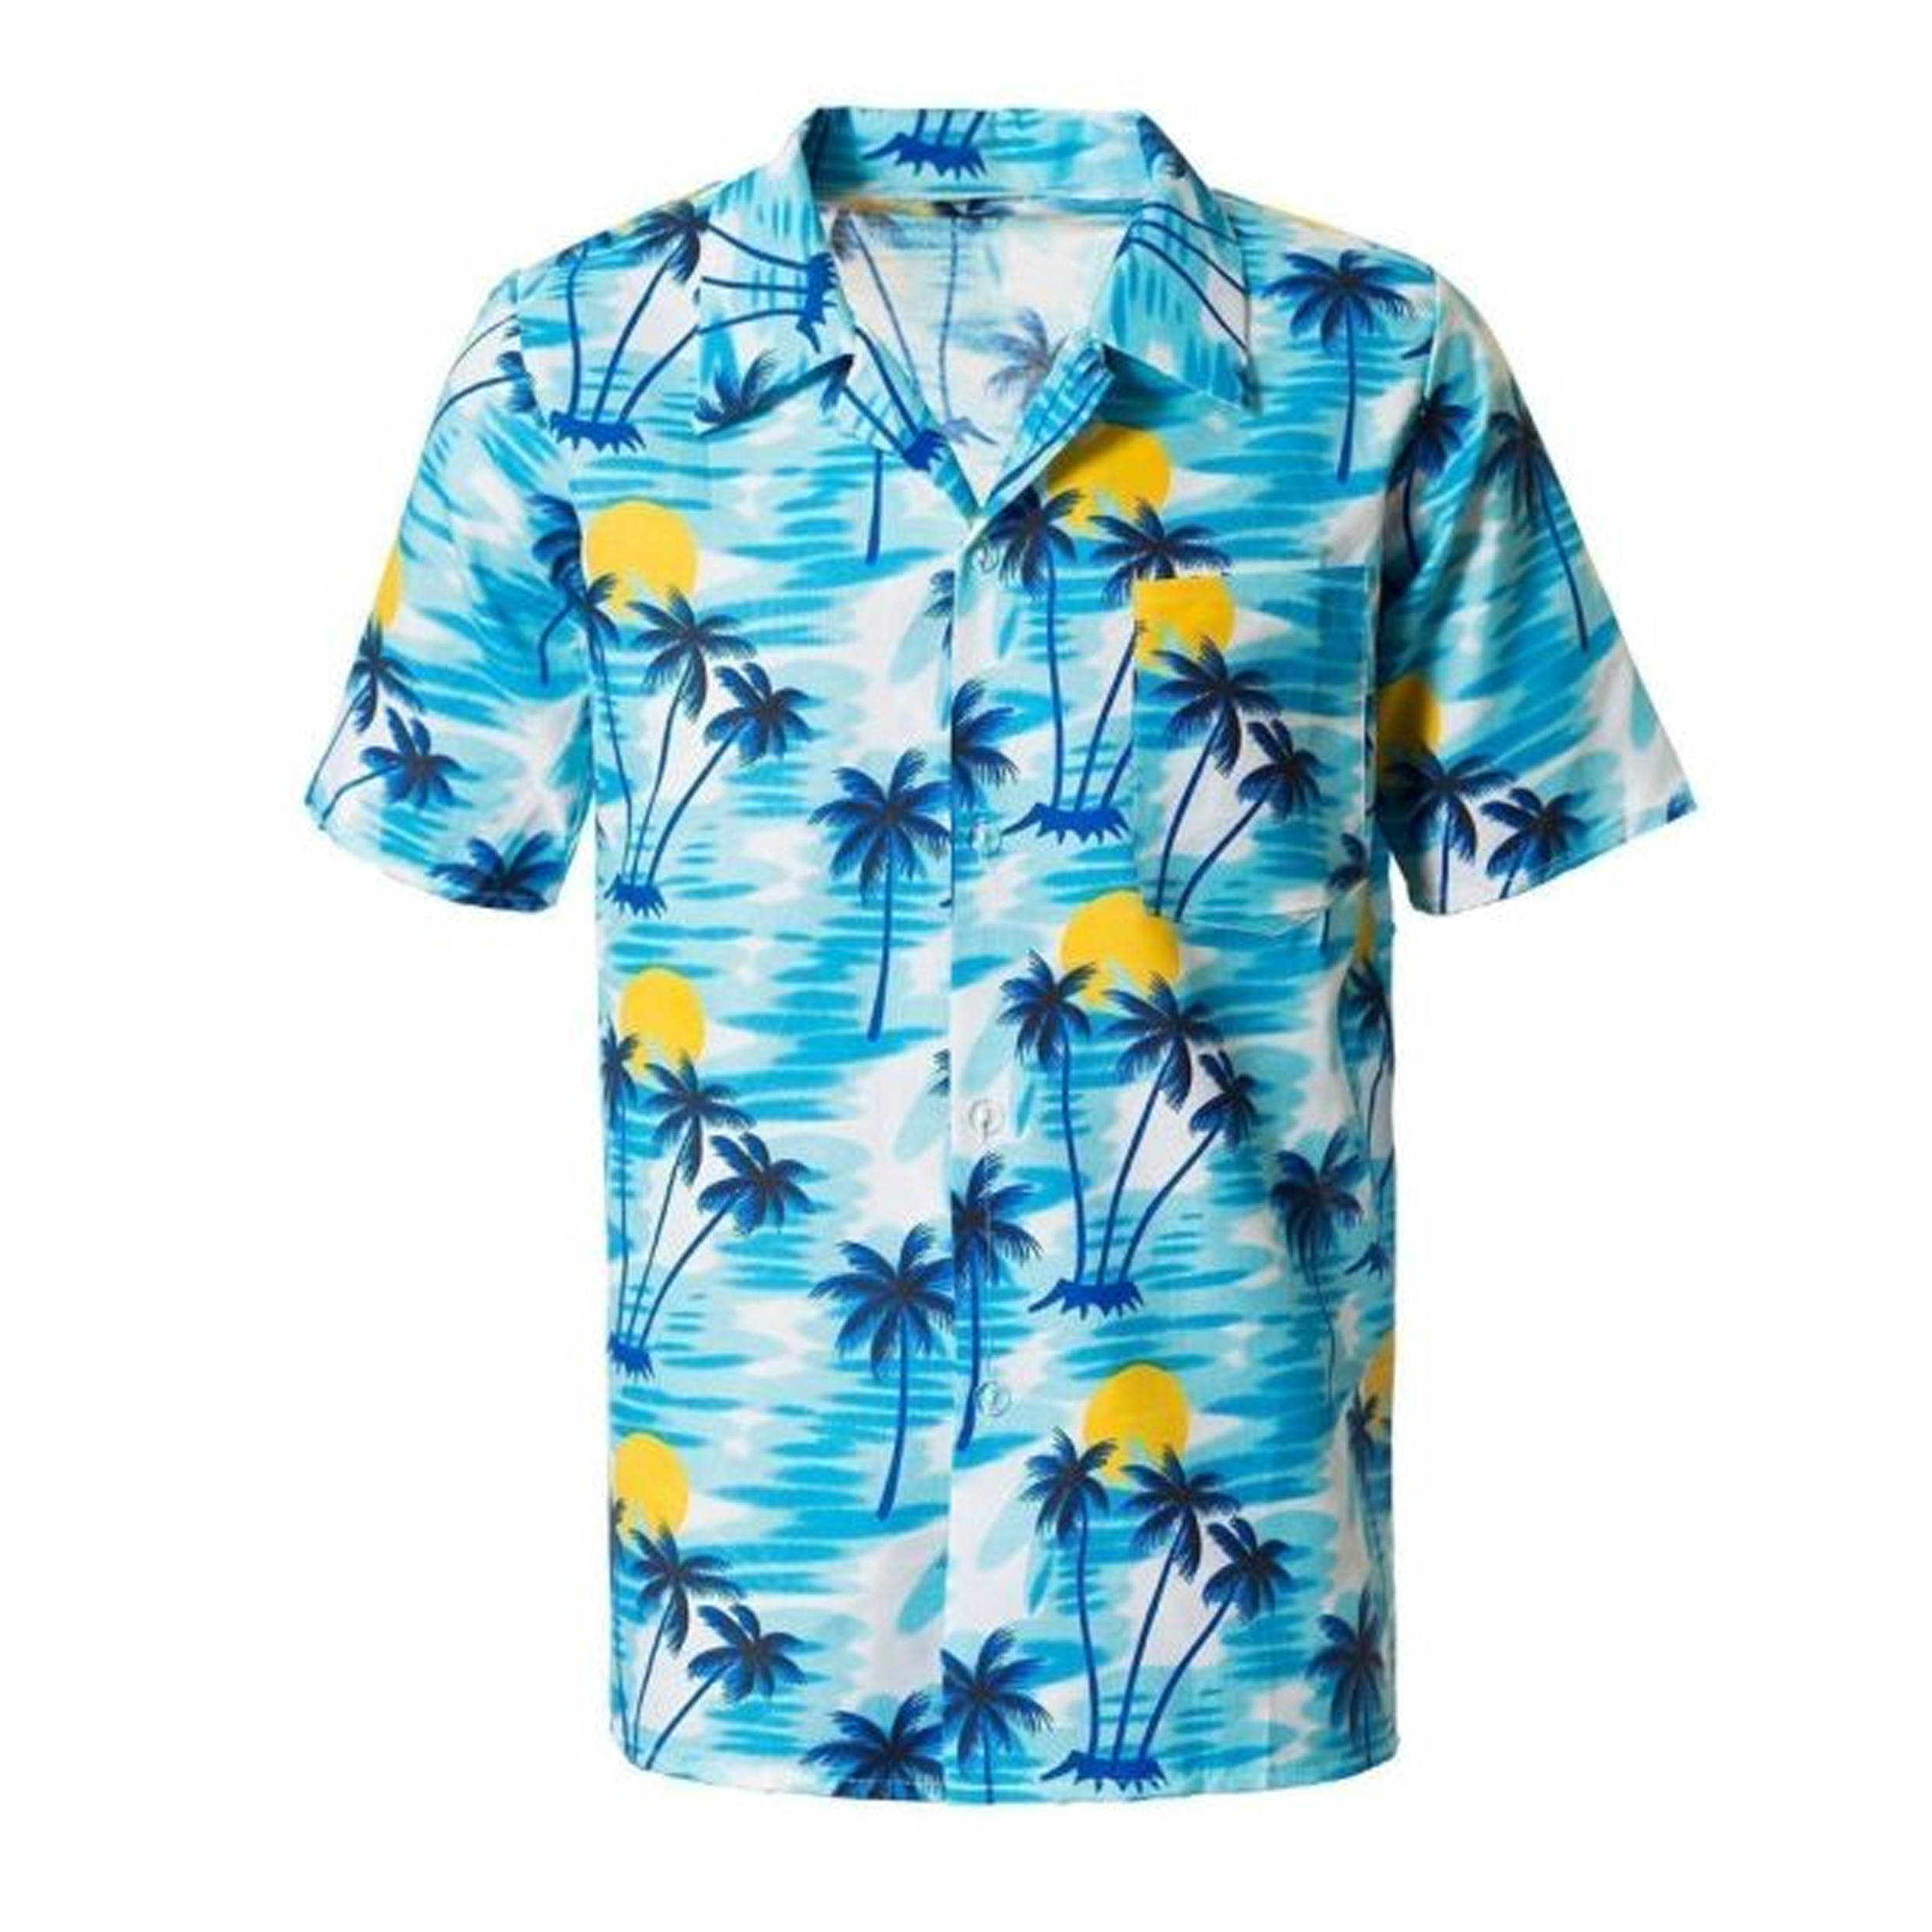 Toppers - Tropical party Hawaii blouse heren - palmbomen - blauw - carnaval/themafeest